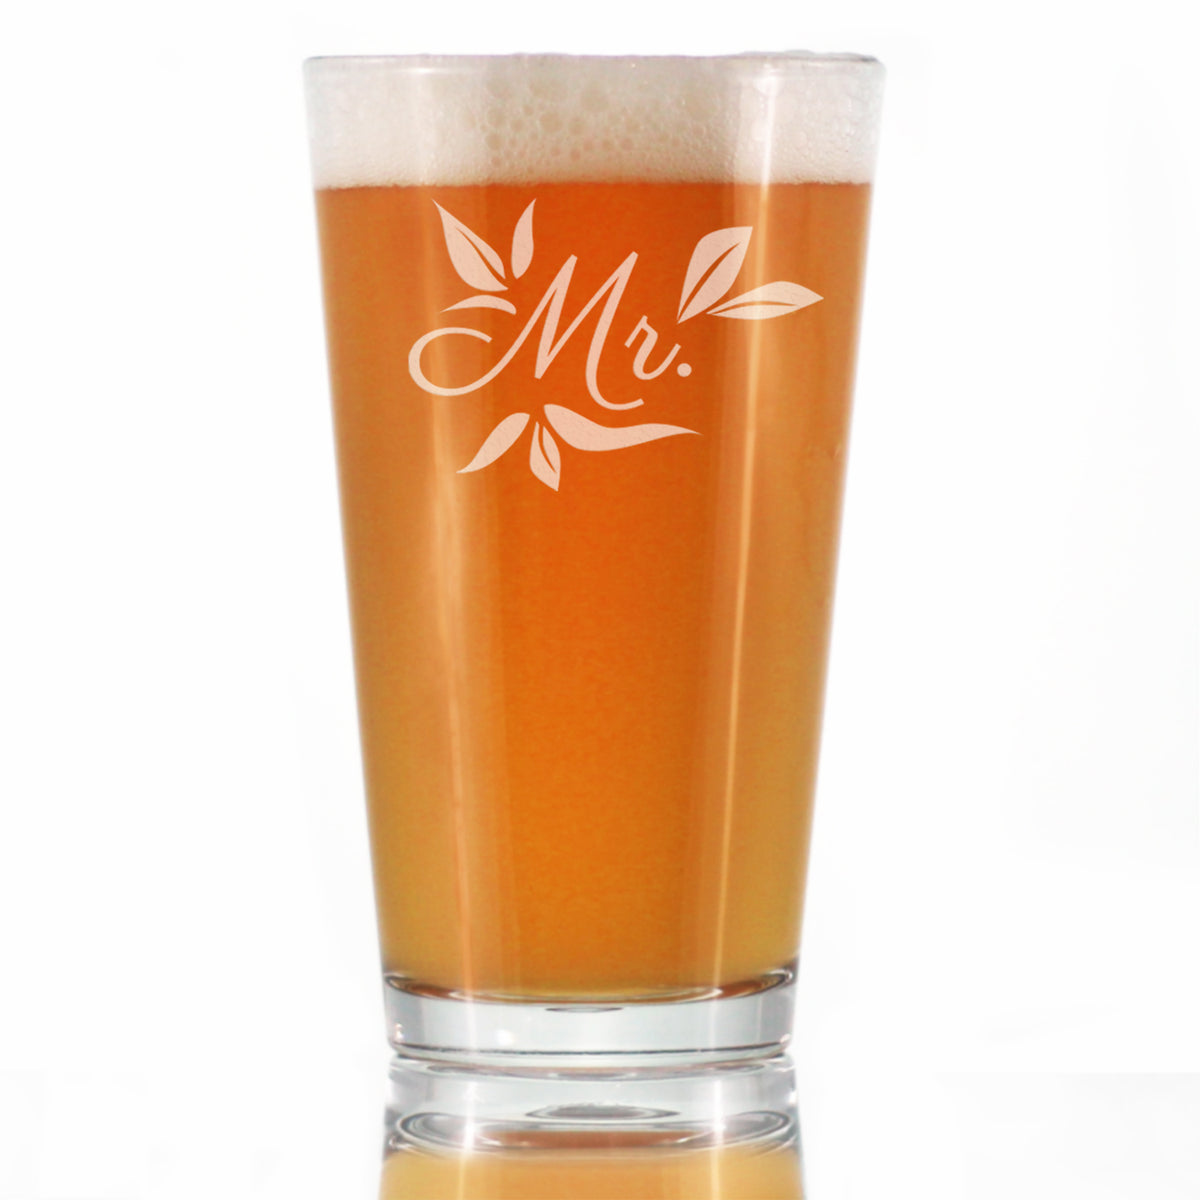 Mr. Pint Glass - Unique Wedding Gift for Groom - Engraved Wedding Cup Gift